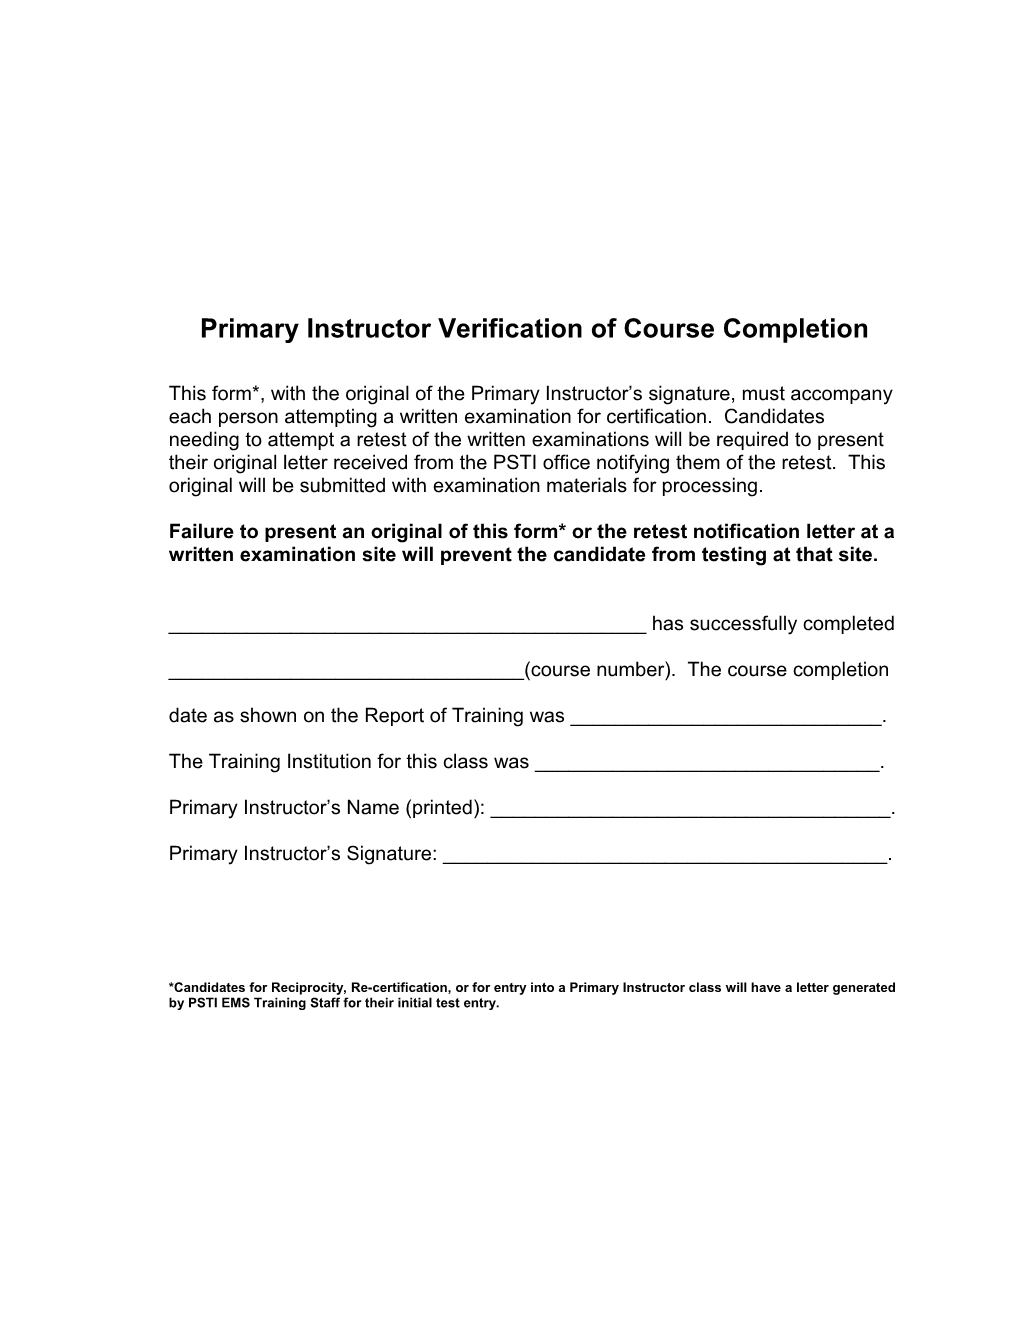 Primary Instructor Verification of Course Completion